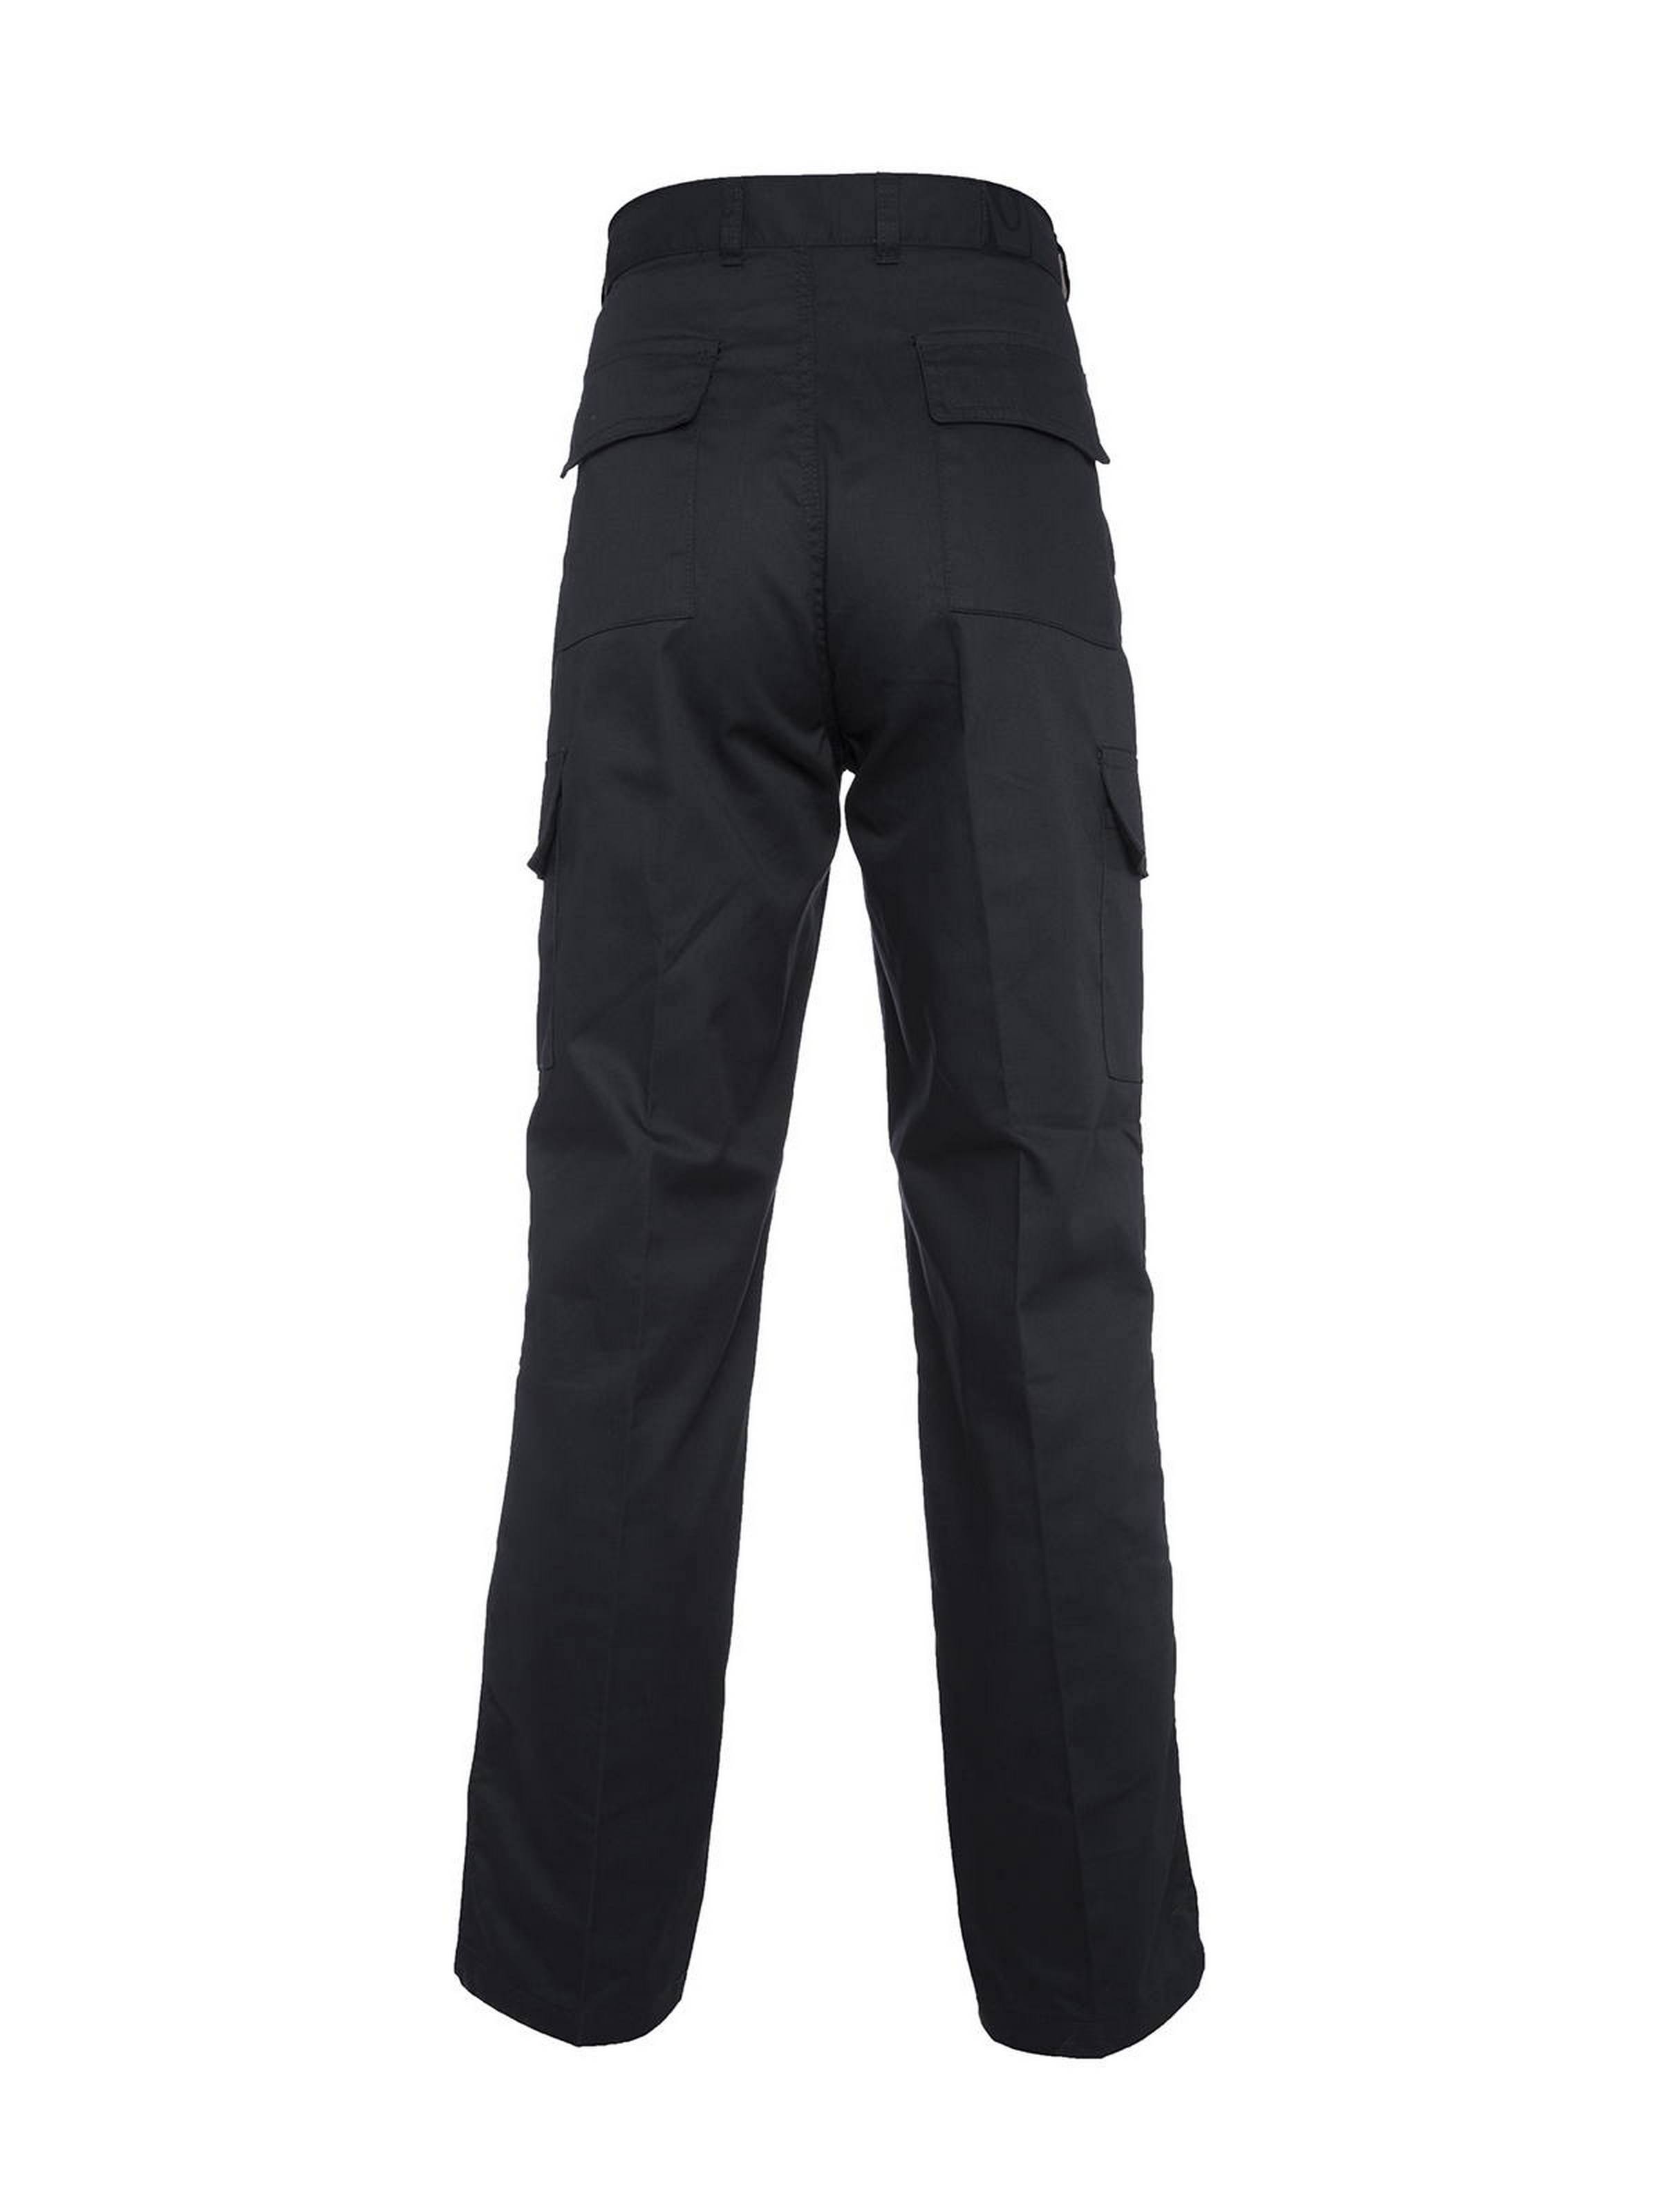 Cargo Trousers With Knee Pockets - HSL Direct - Workwear Retailer